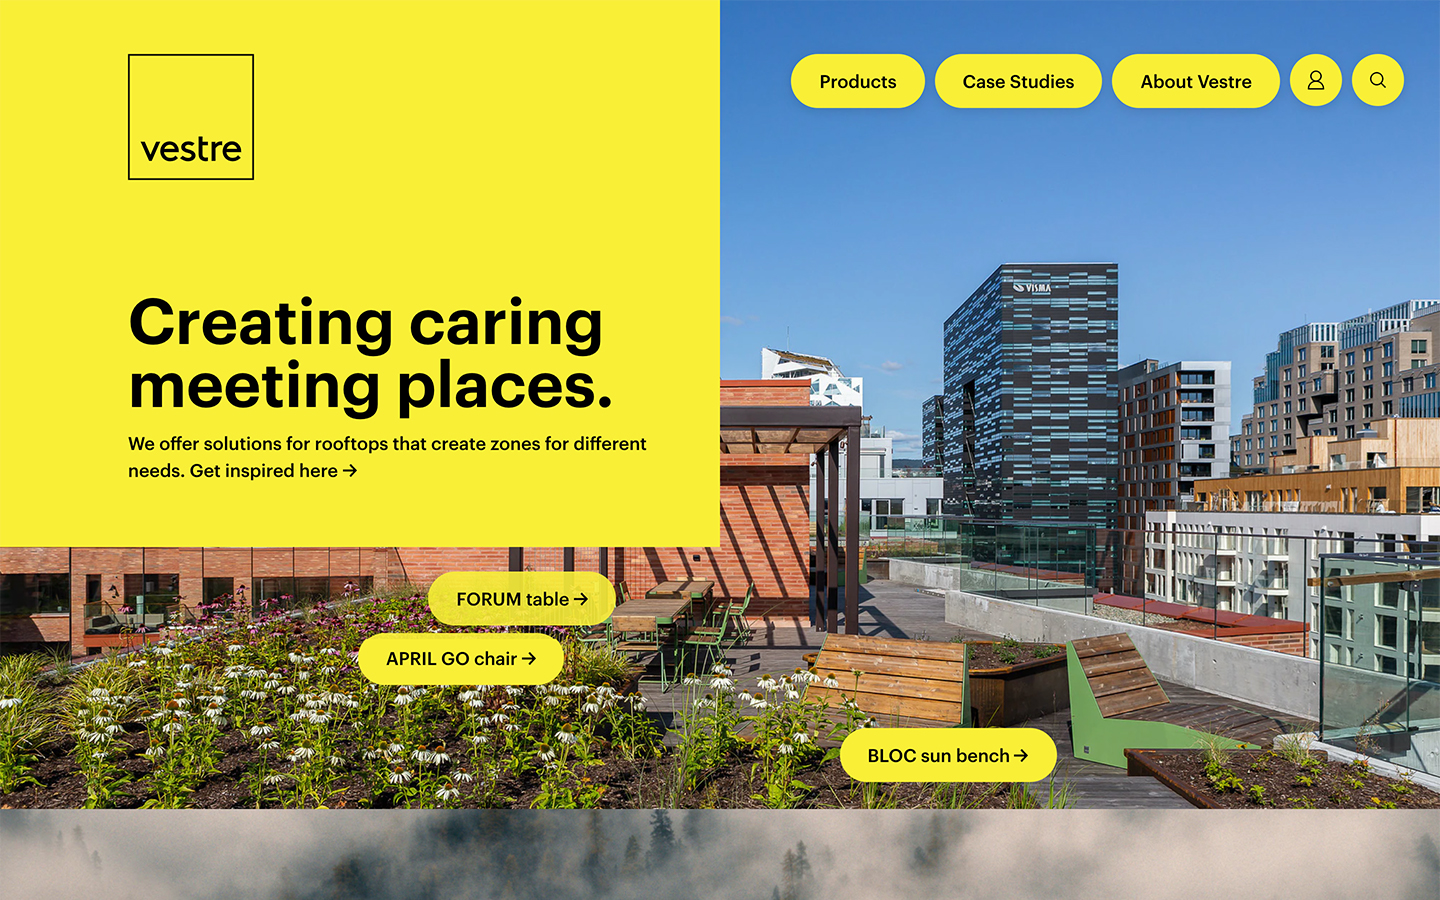 Vestre | Creating caring meeting places.